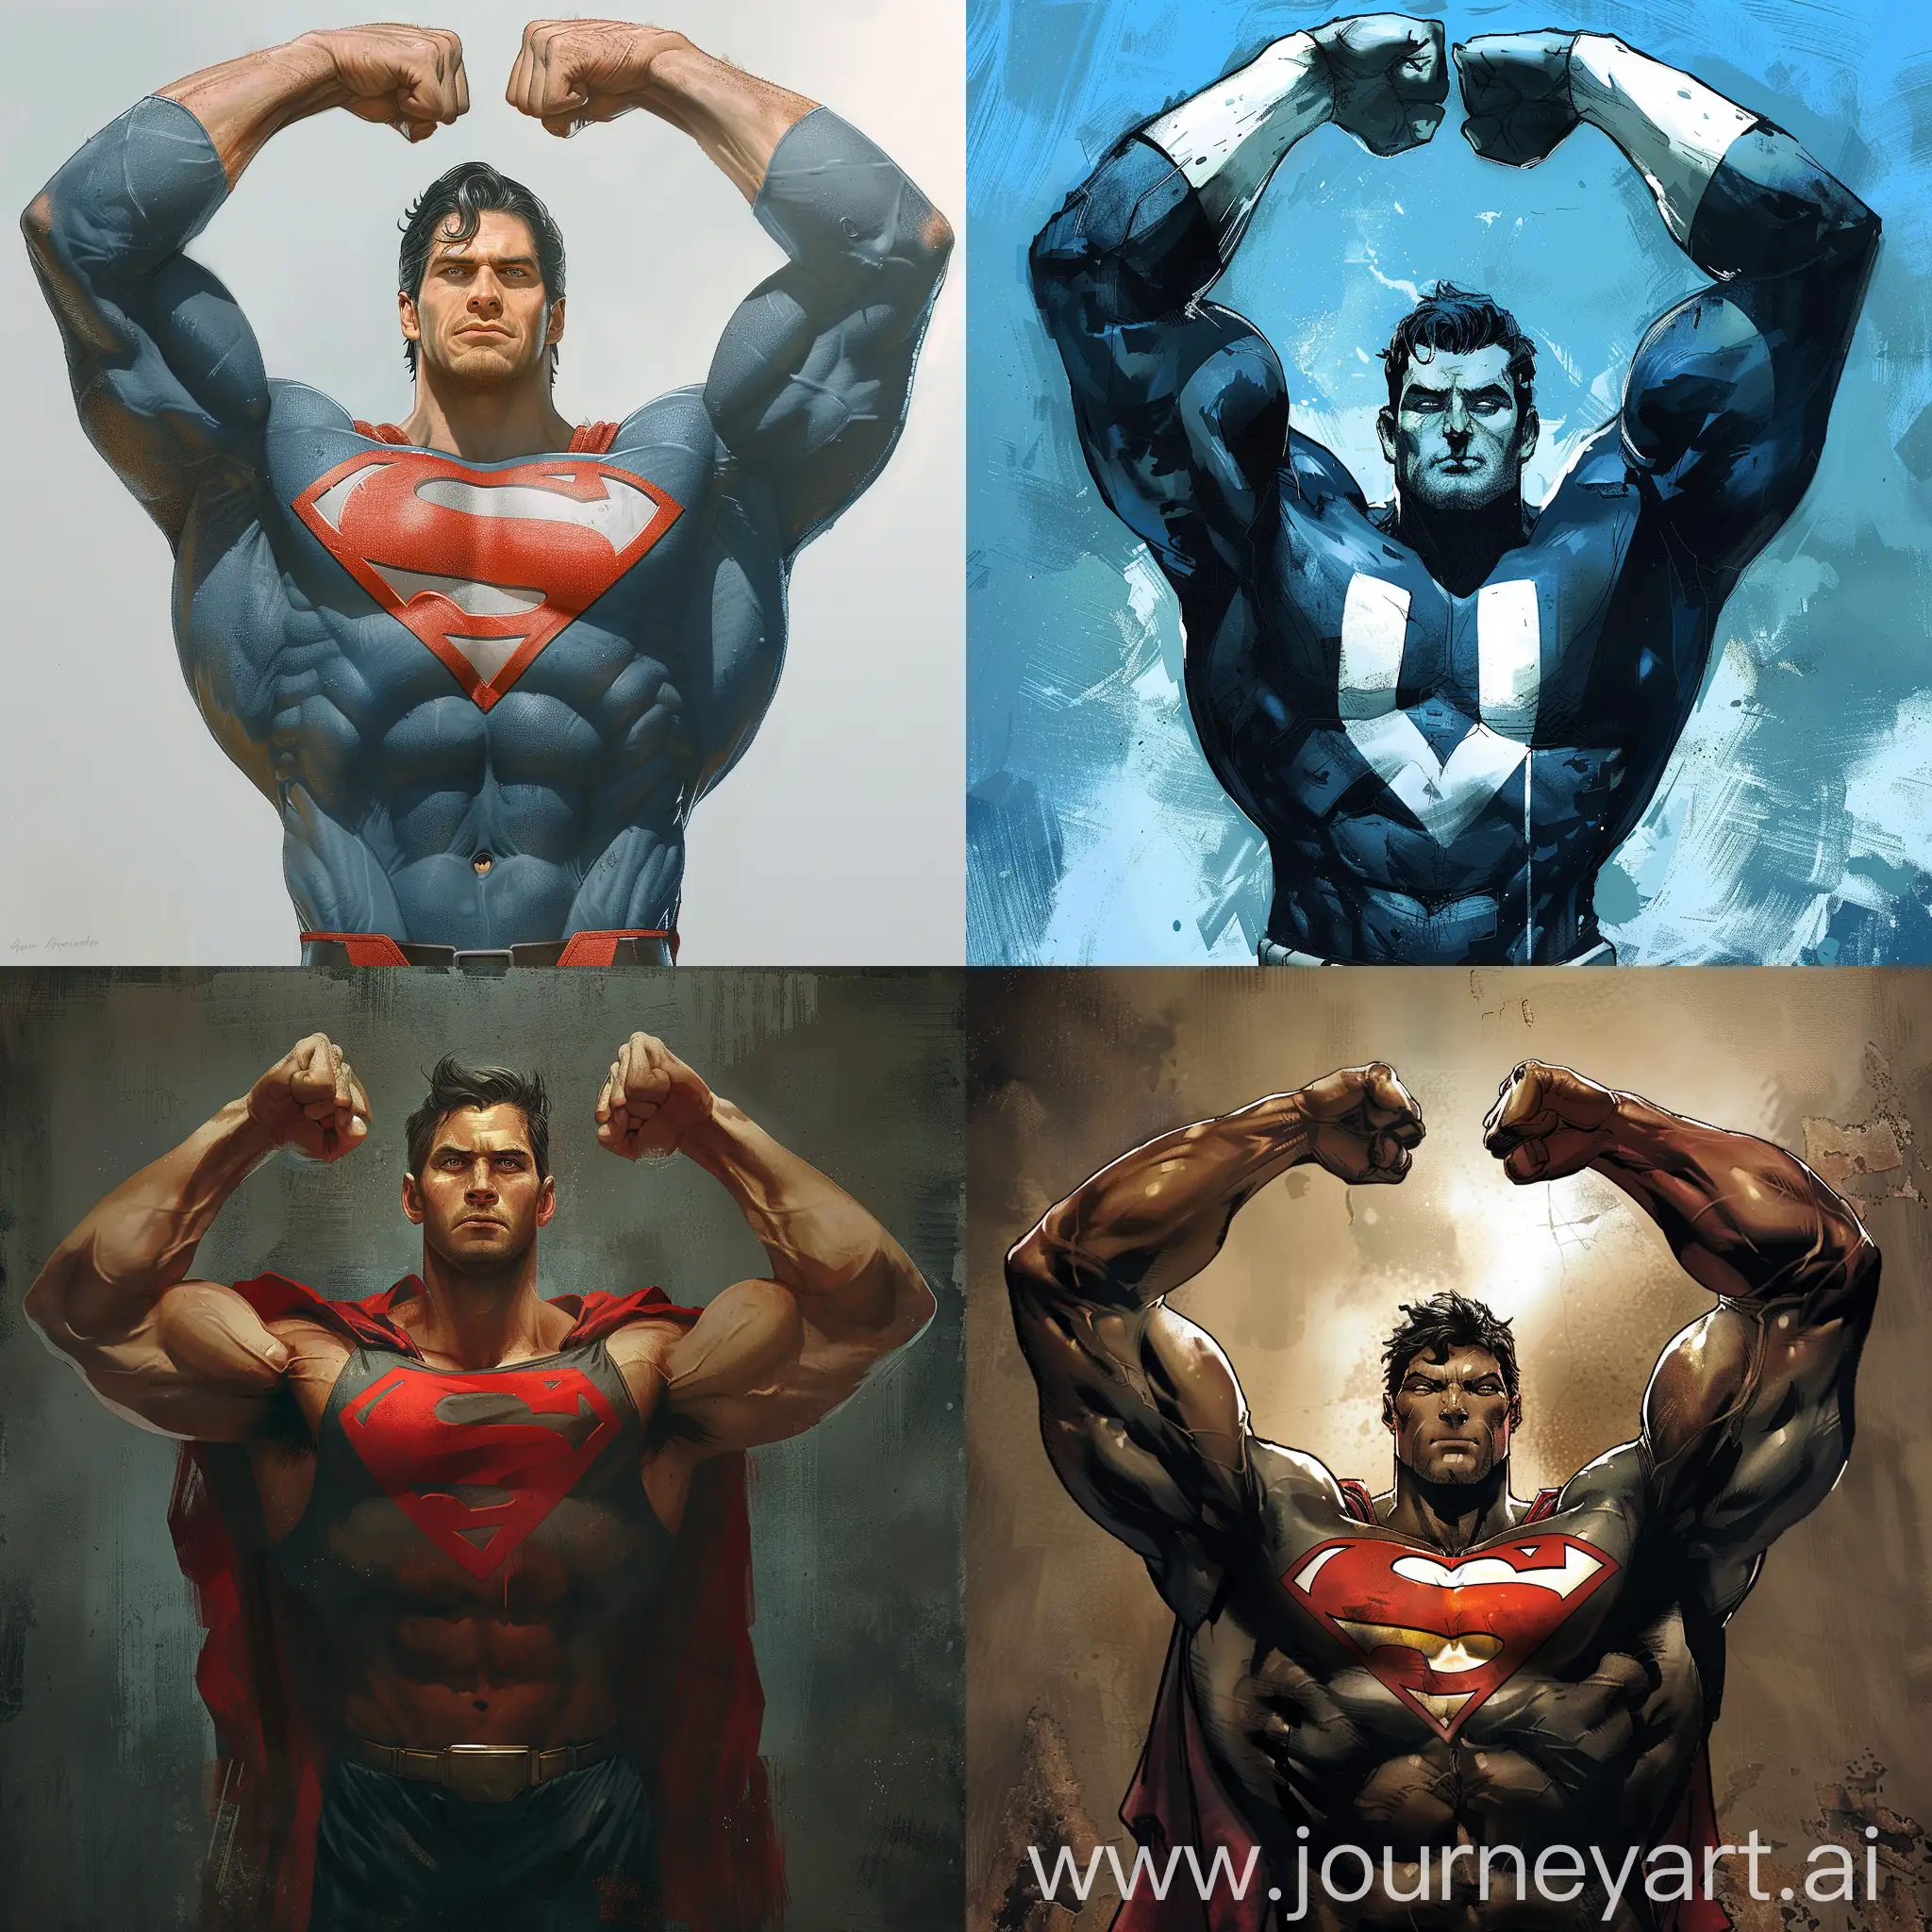 Mighty-Hero-Celebration-with-Unique-UShaped-Arm-Gesture